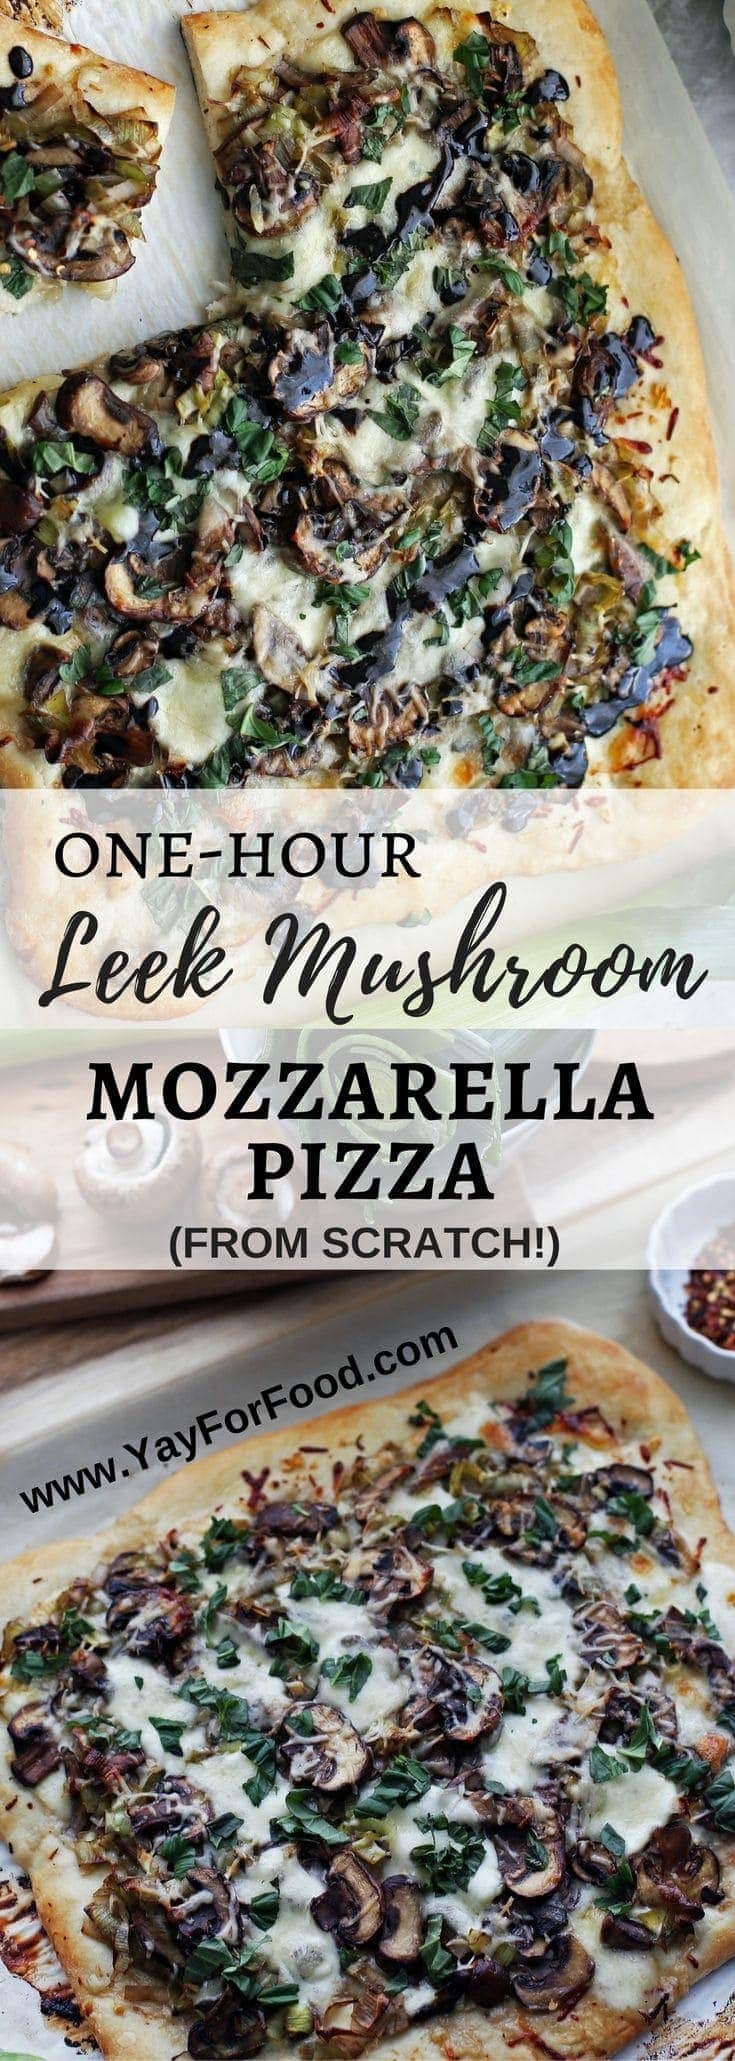 One-Hour Leek Mushroom Mozzarella Pizza (from scratch!) - Yay! For Food